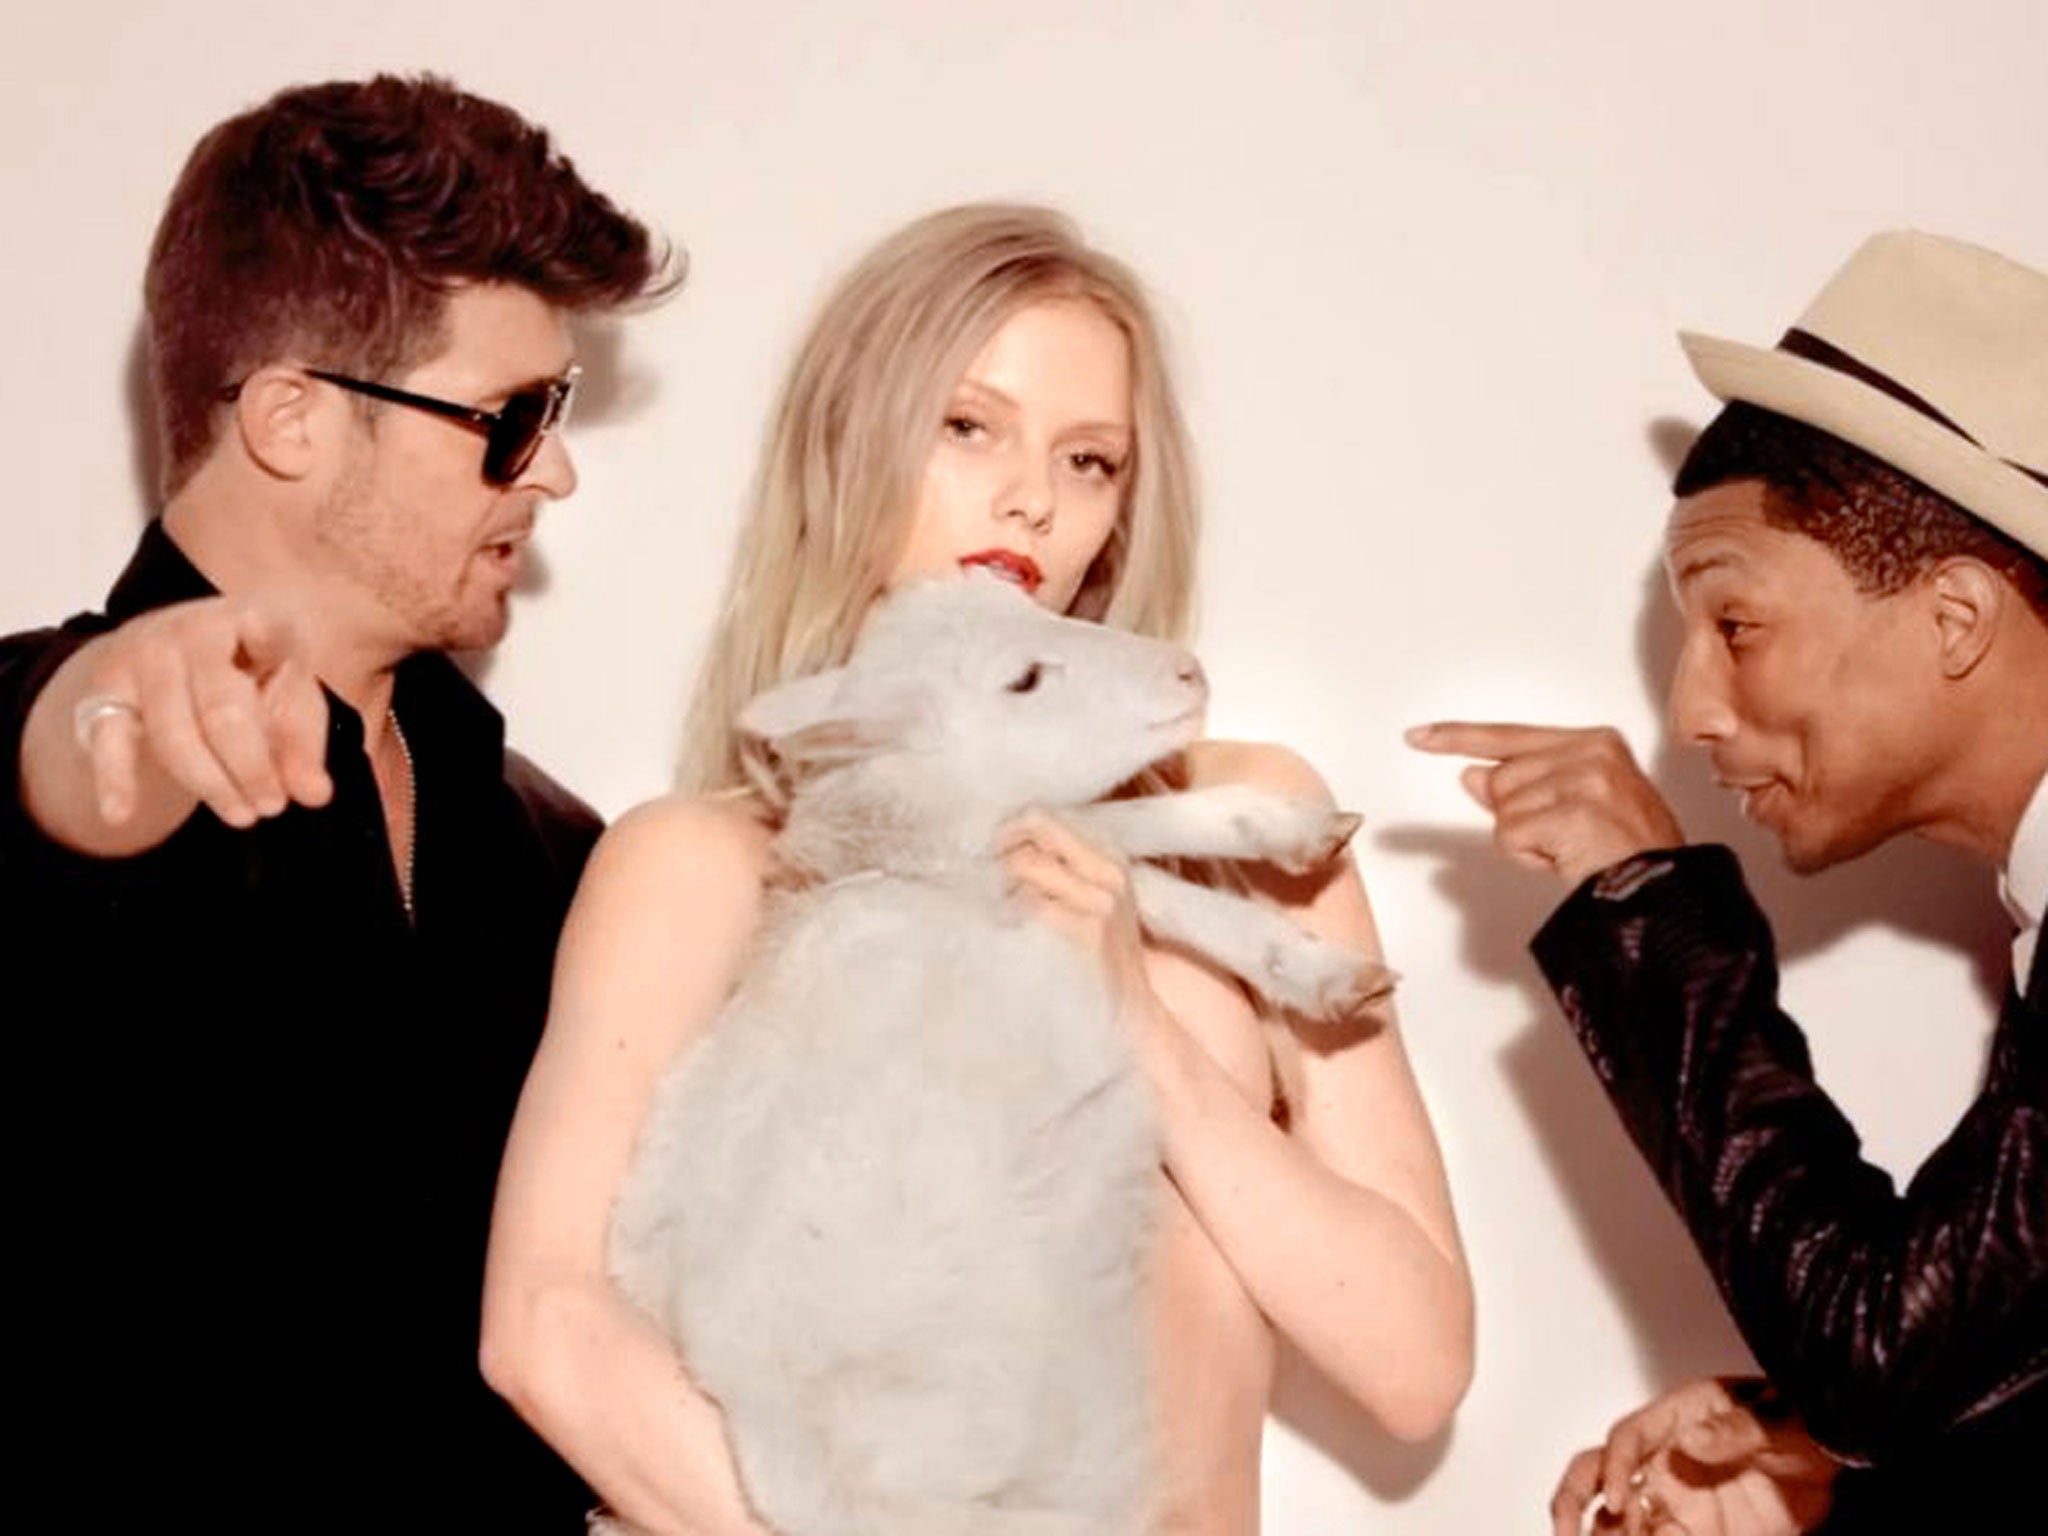 The highly controversial video to Robin Thicke's 'Blurred Lines' features multiple nude female models